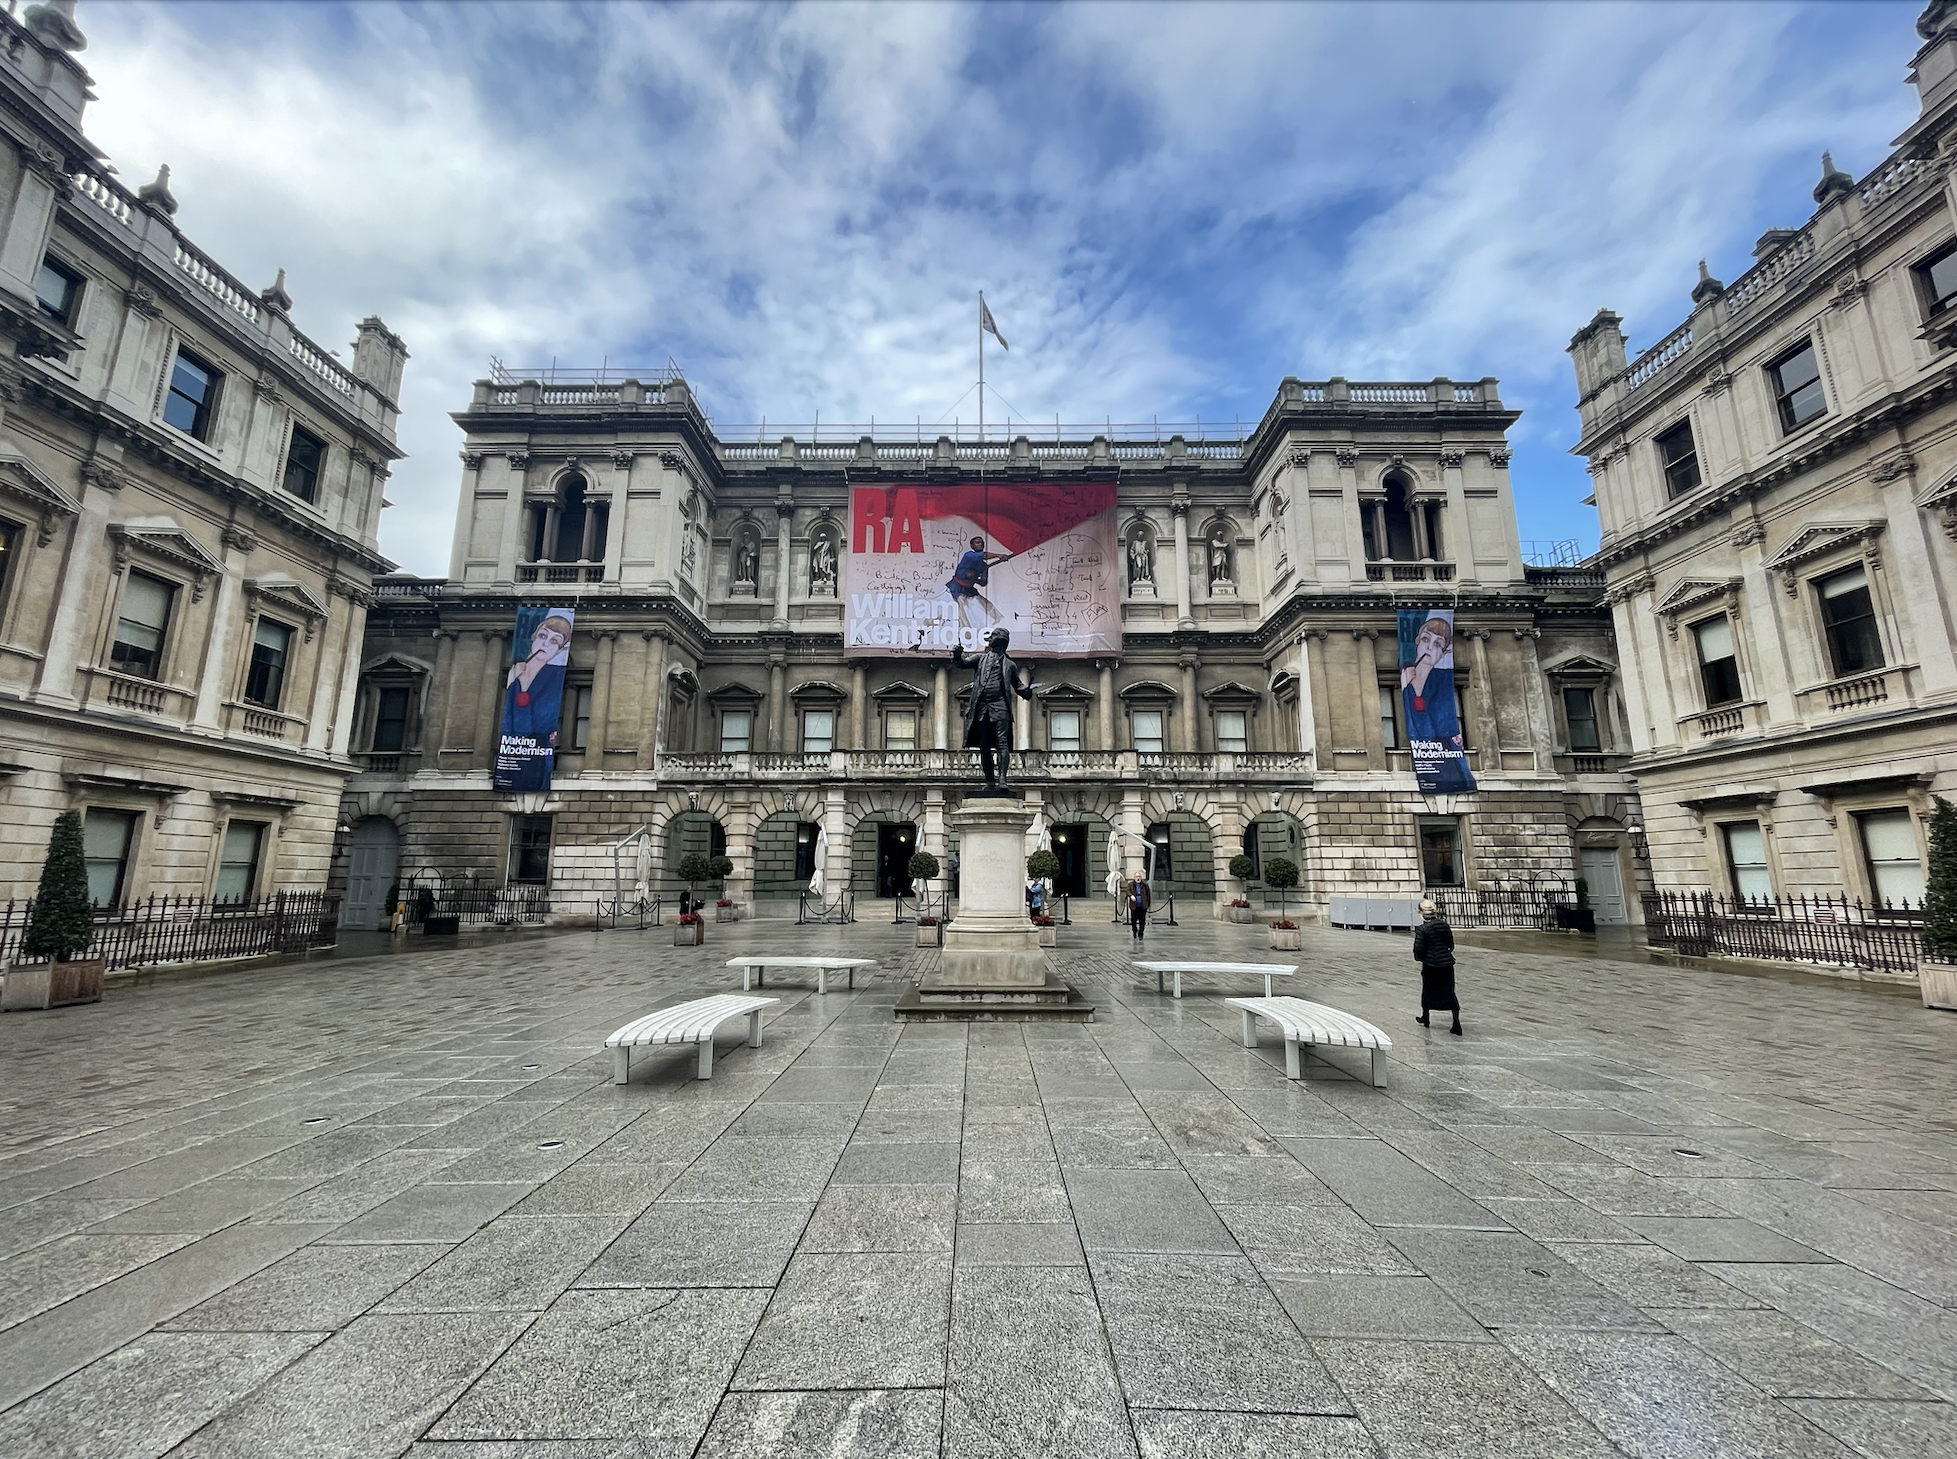 Millcroft Wins Scaffolding Contract at the Royal Academy of Arts